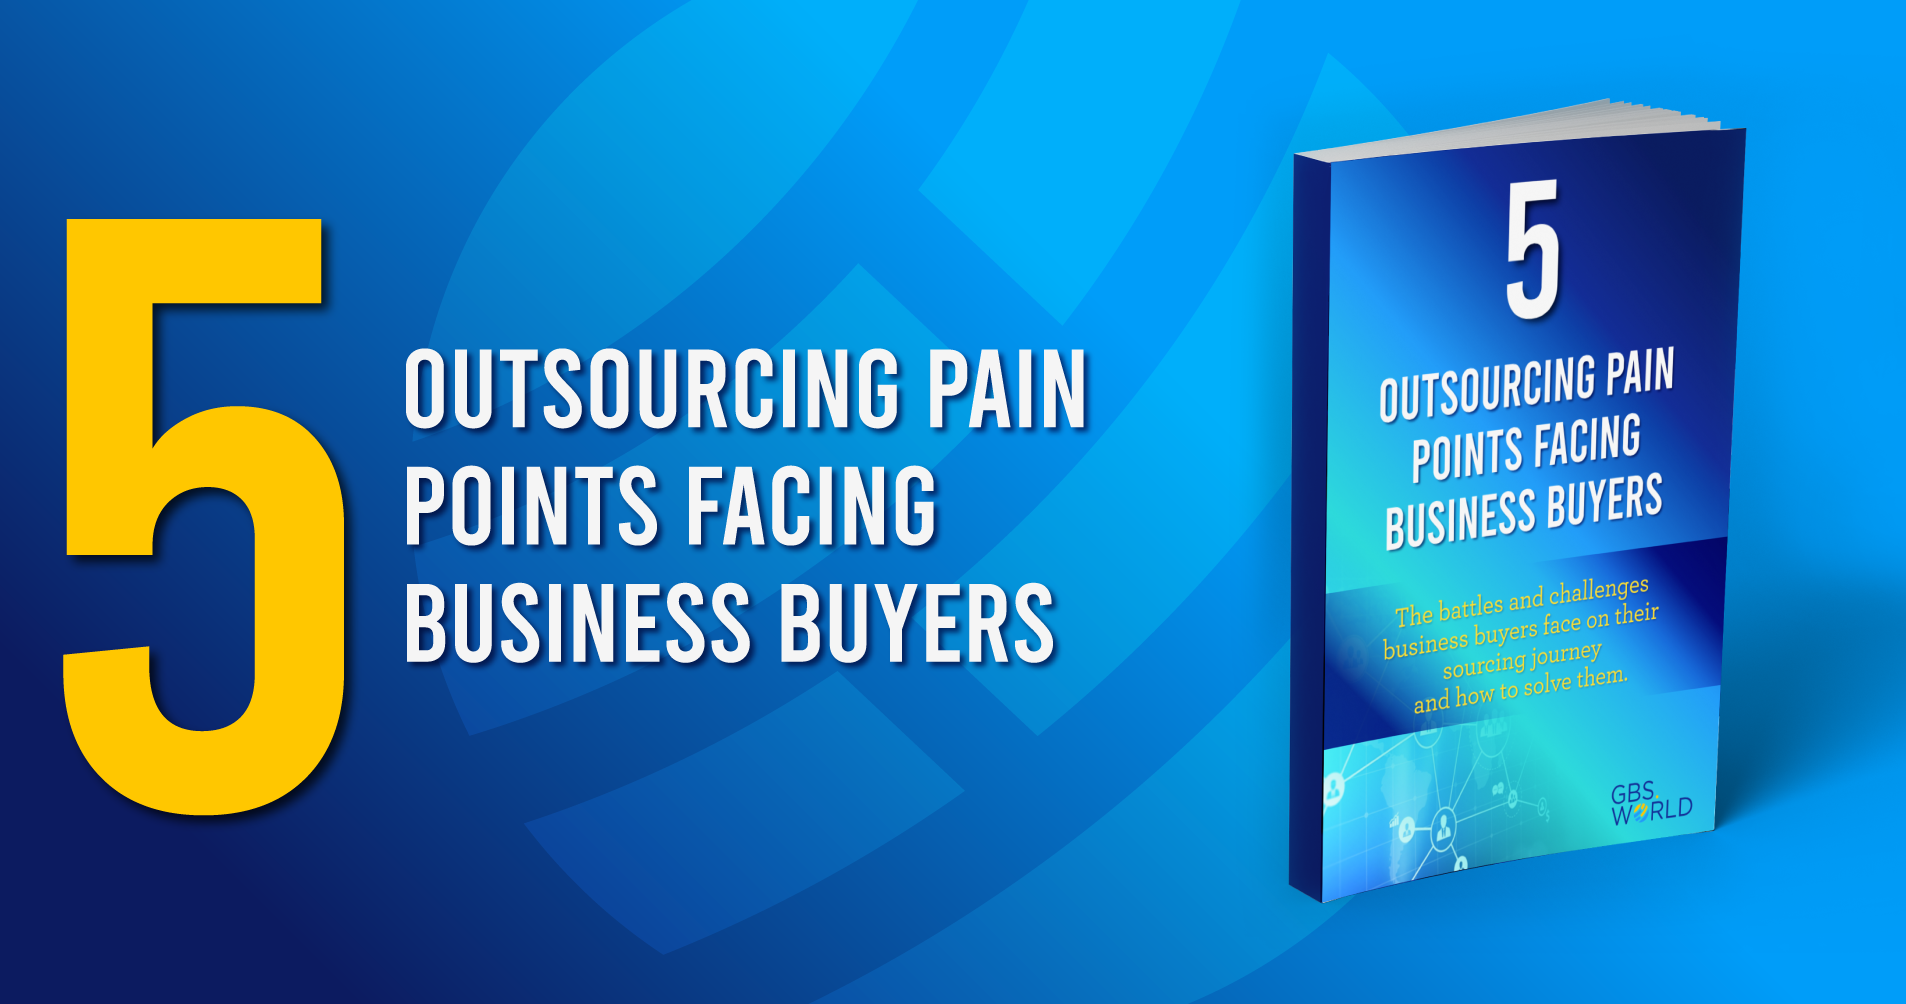 Research reveals 5 biggest outsourcing pain points facing business buyers